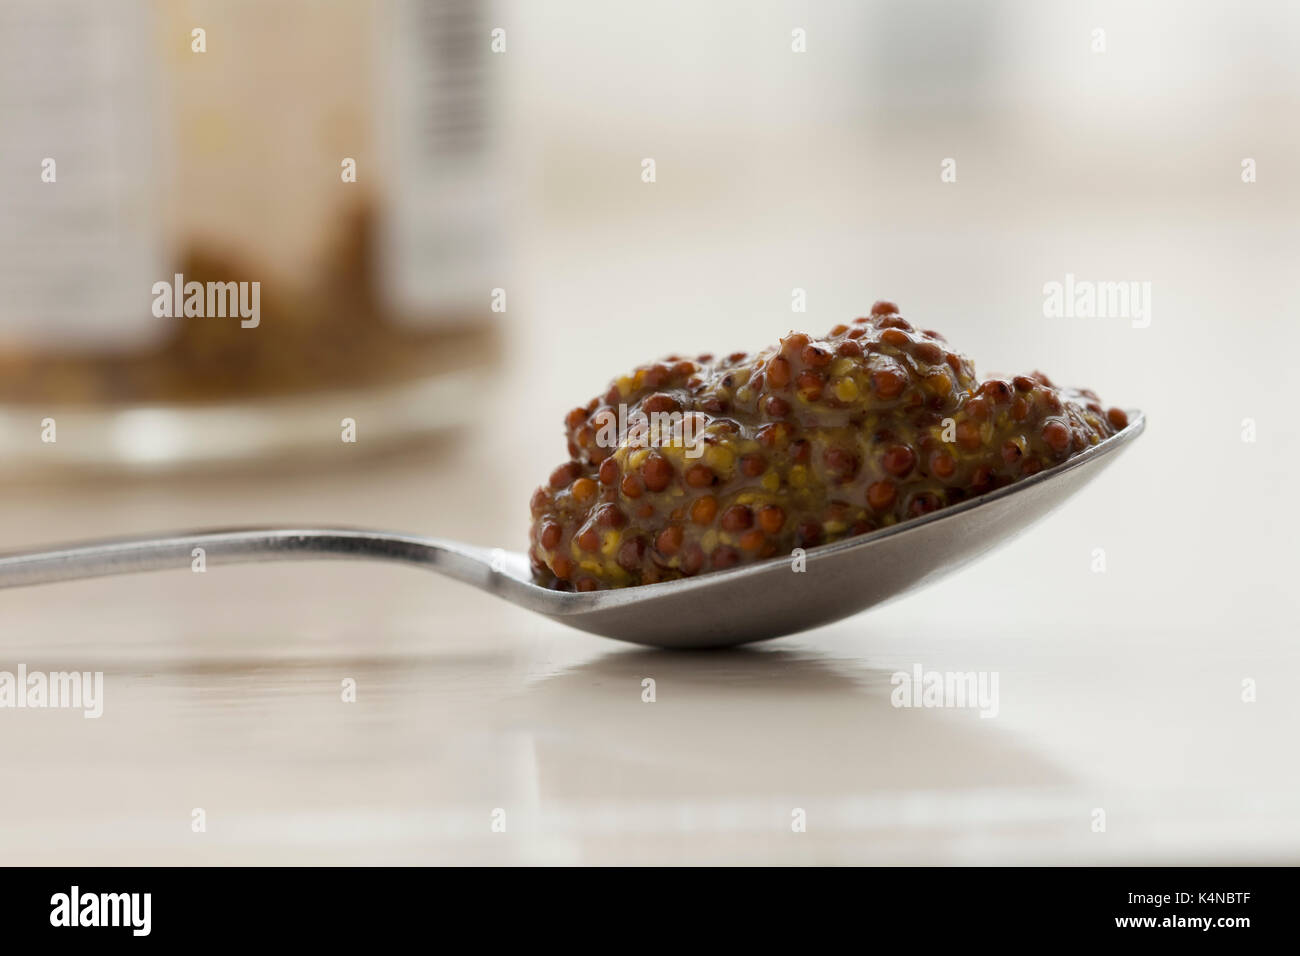 A heaped teaspoon of wholegrain mustard with the glass mustard jar forming part of the out of focus background. Shot in natural light. Stock Photo